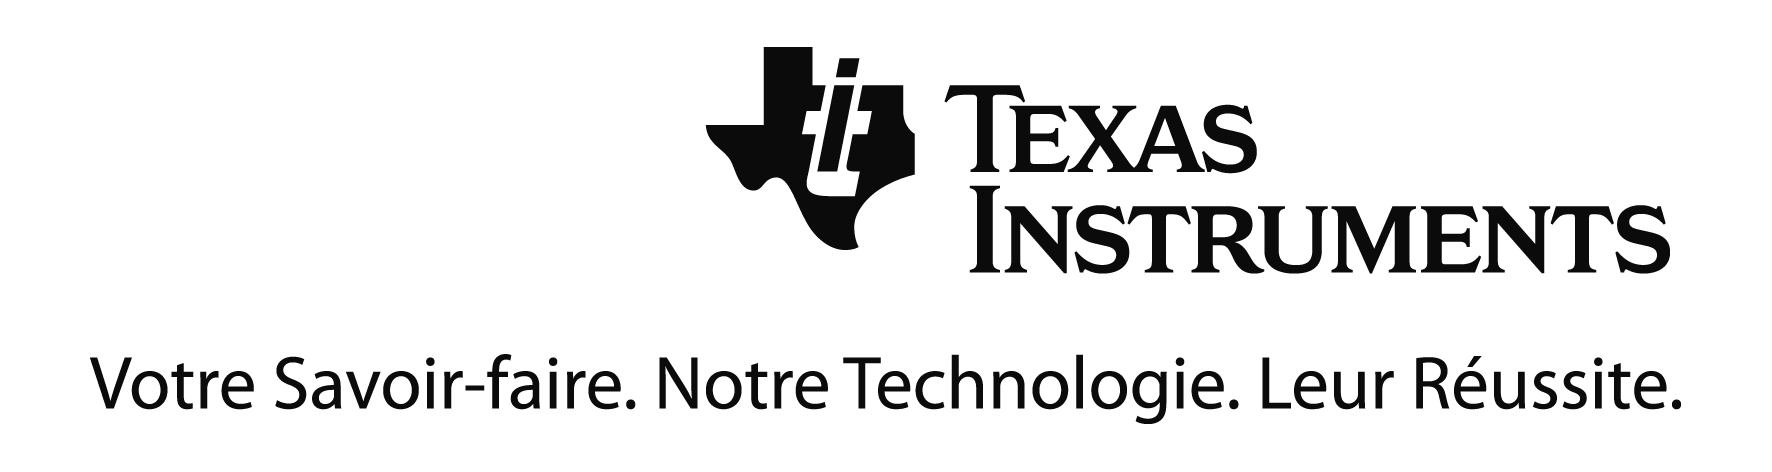 Image Texas Instruments Logo Pc Android iPhone And iPad Wallpaper